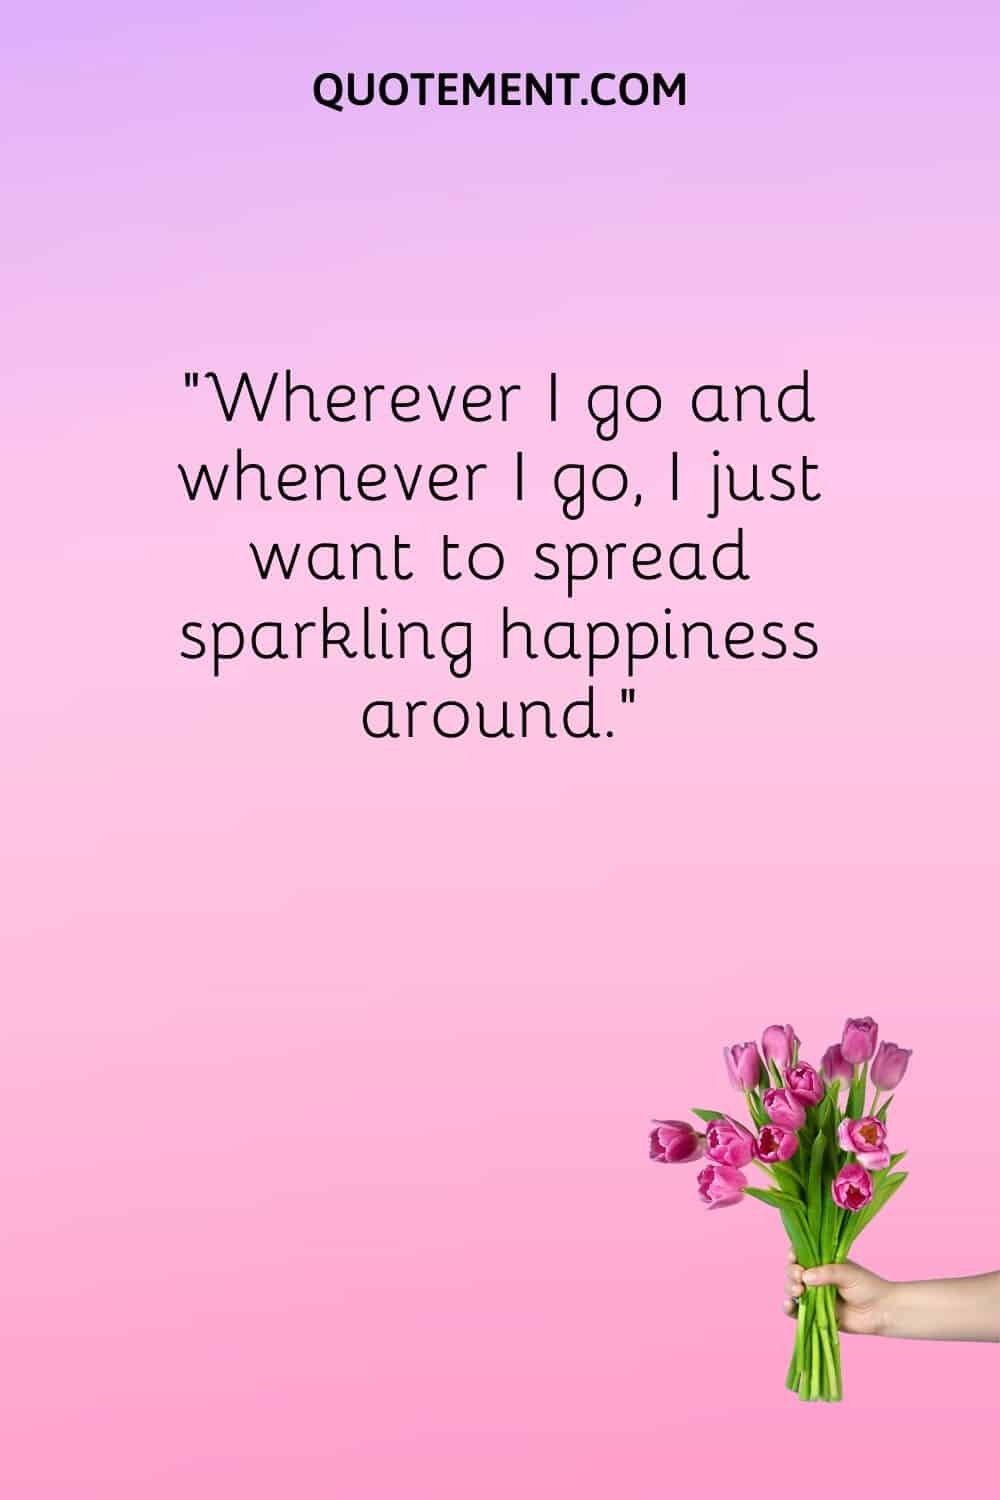 Wherever I go and whenever I go, I just want to spread sparkling happiness around